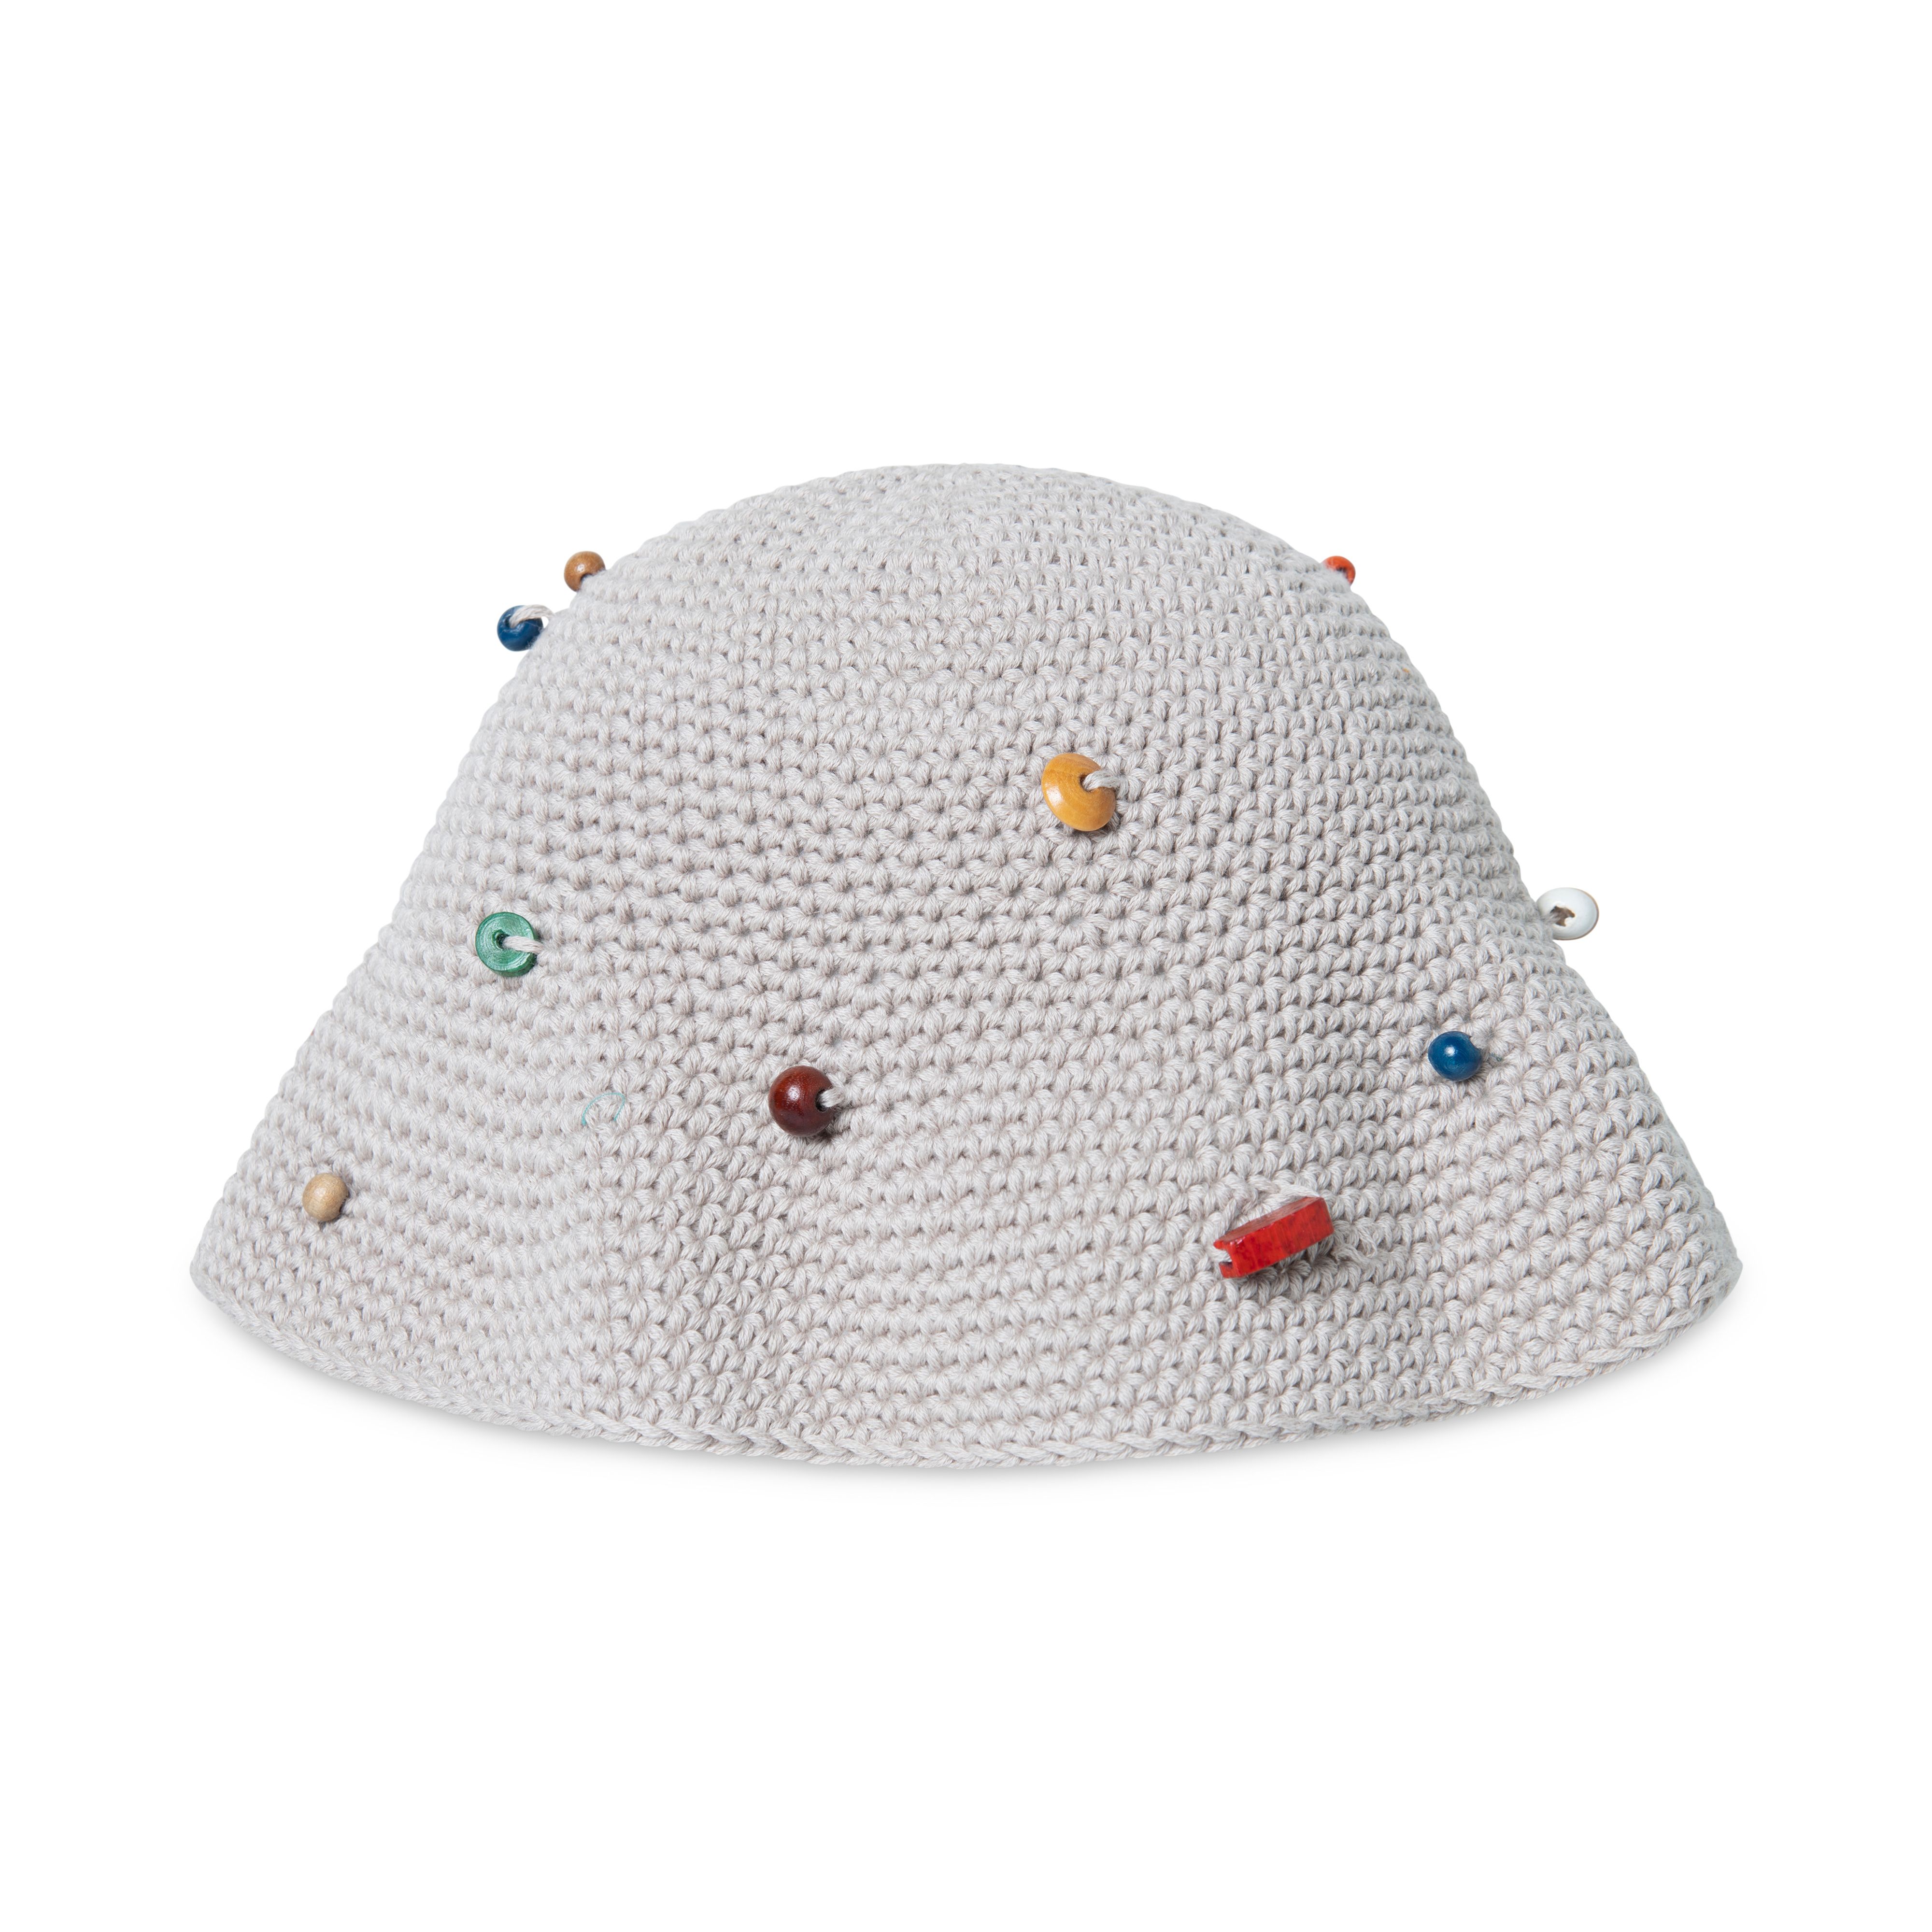 Everyone's Mother Buoy Bucket Hat by Haley Appell | Basic.Space